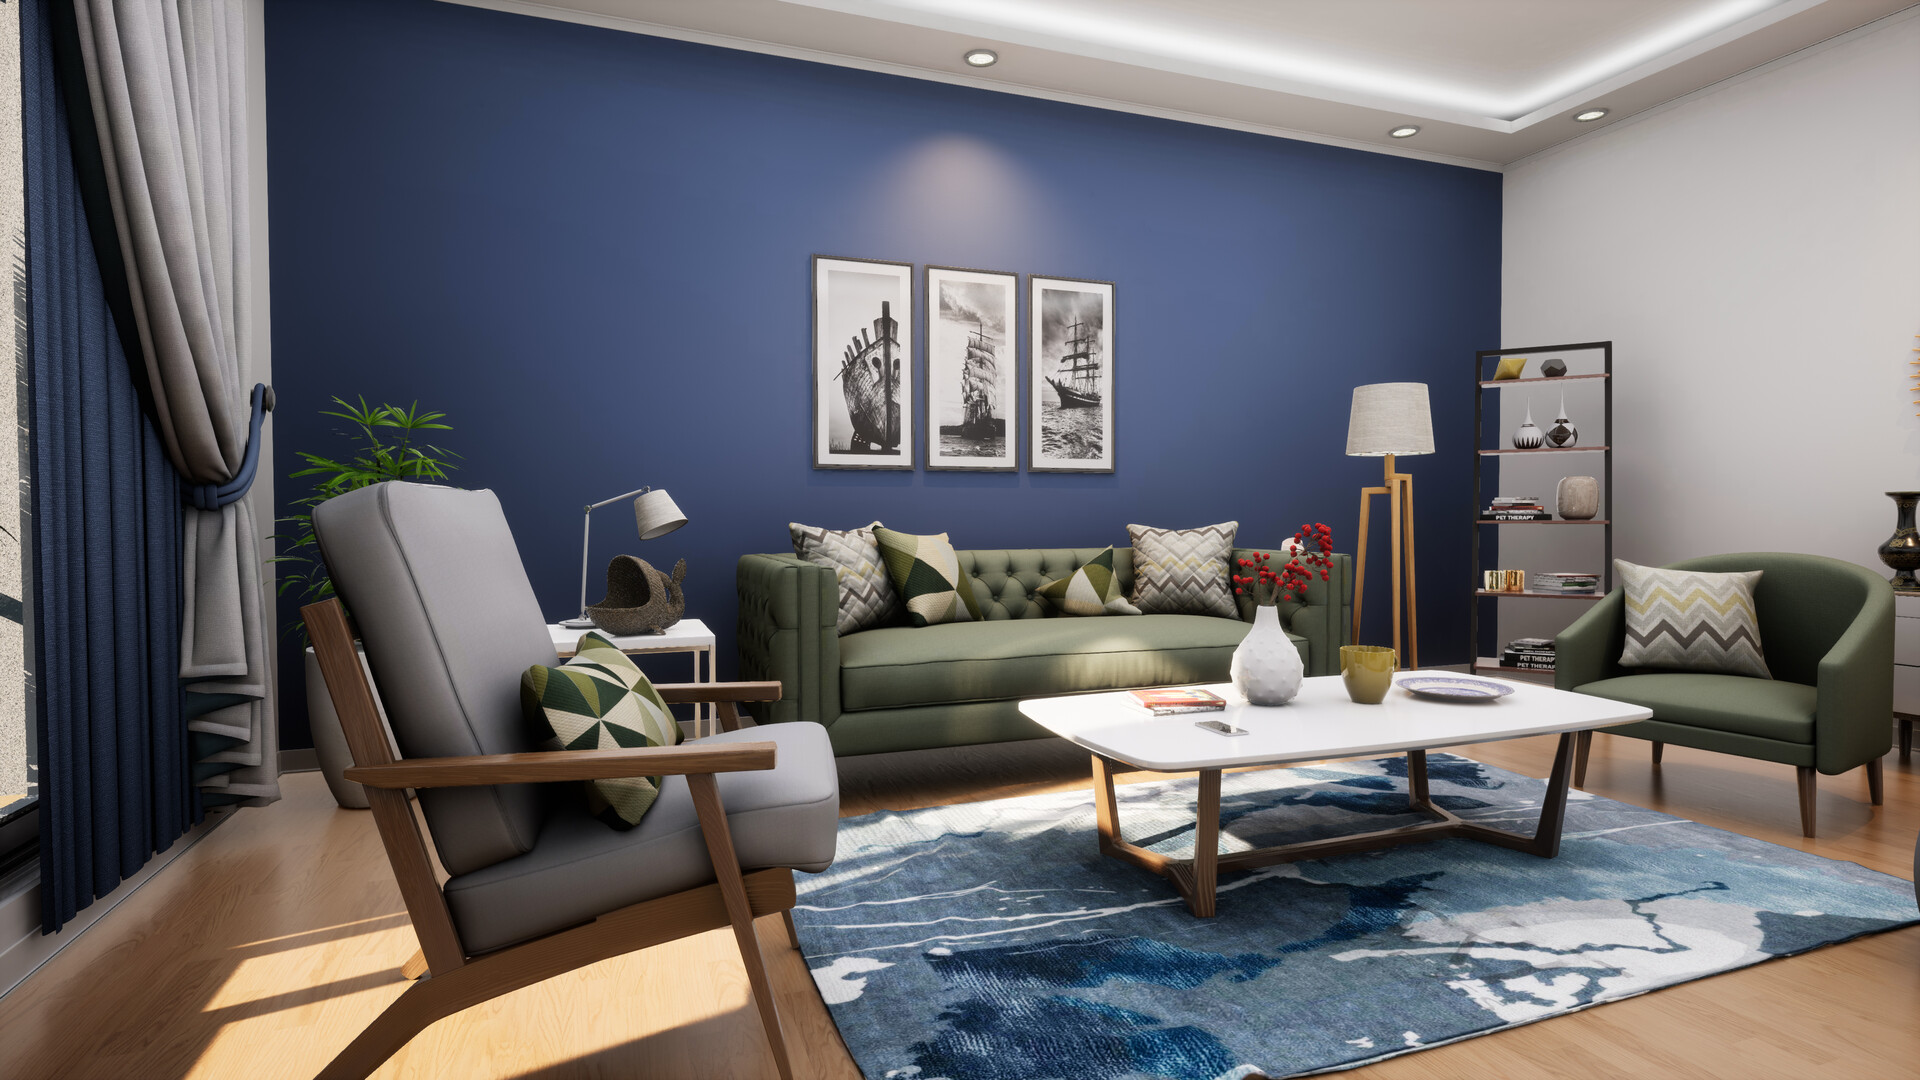 ArtStation - Real-time Living Room Architecture Visualizations in ...